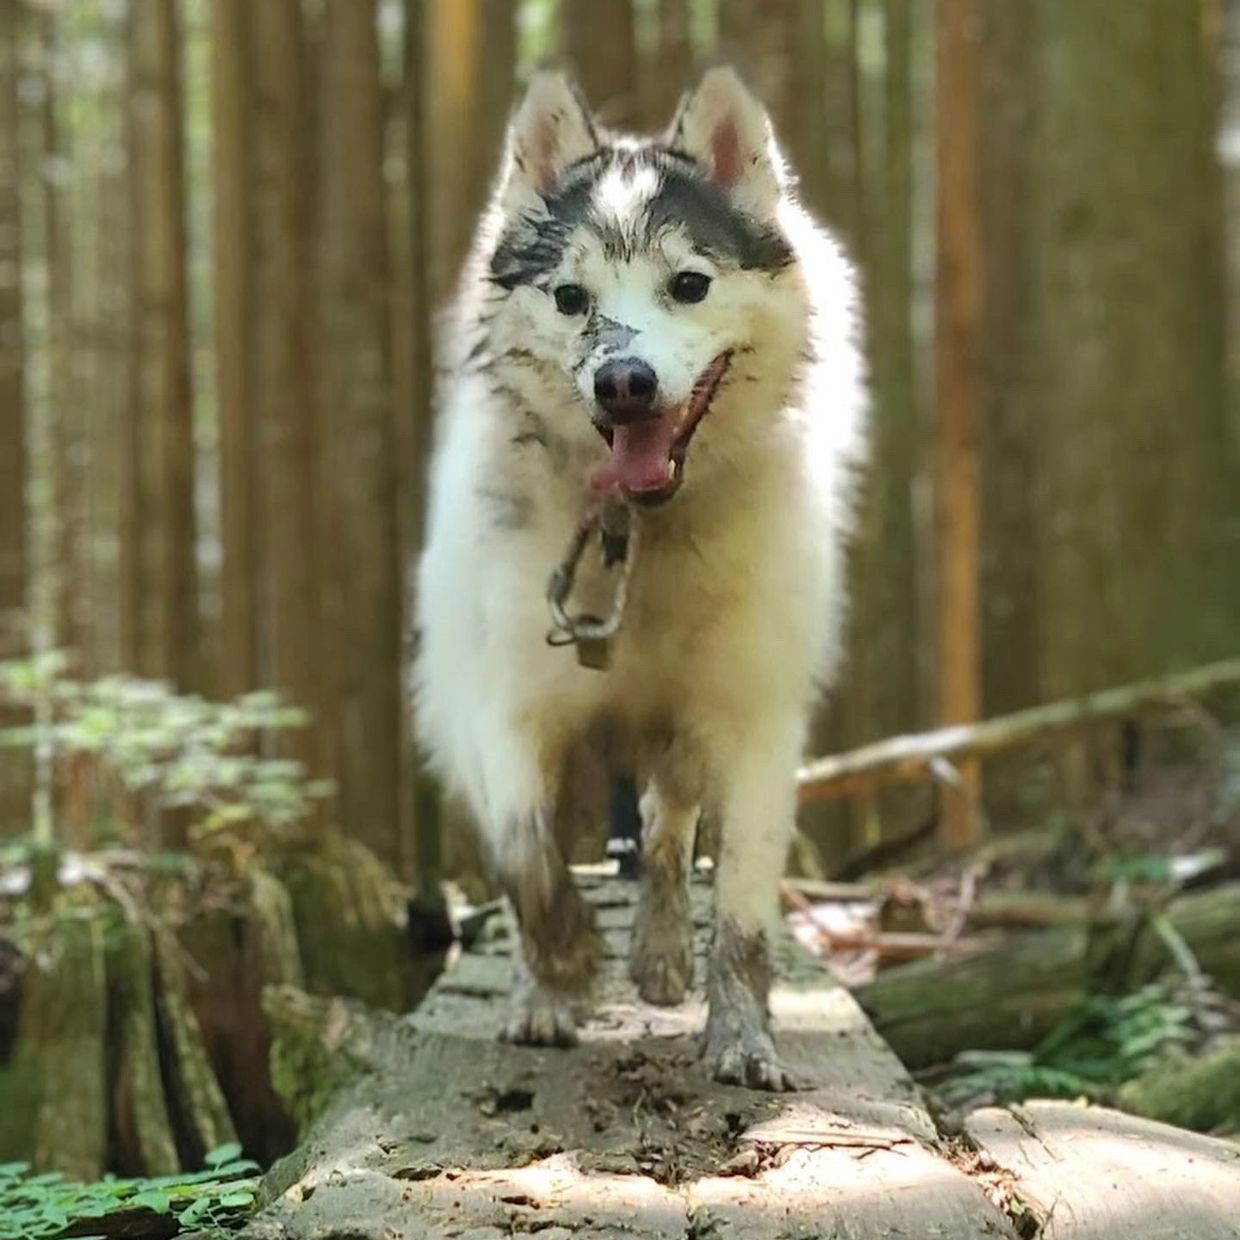 Dog balancing on a log in the forest.